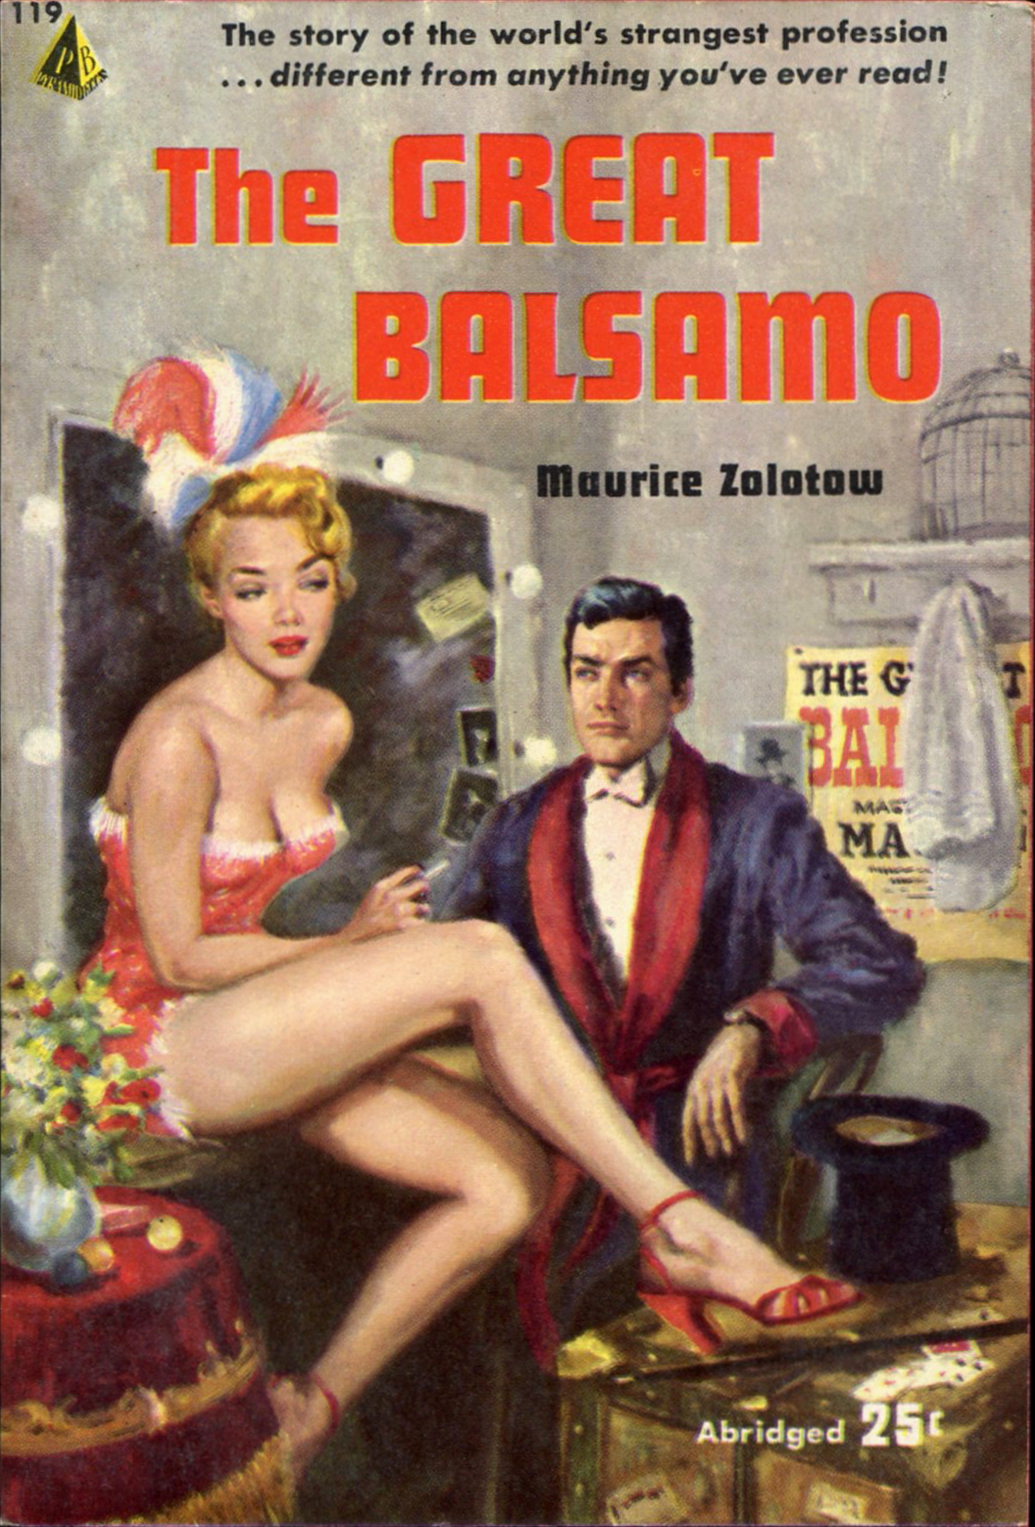 47065681372-Maurice Zolotow. The Great Balsamo [Brooklyn Youngster]. Pyramid, 1954.